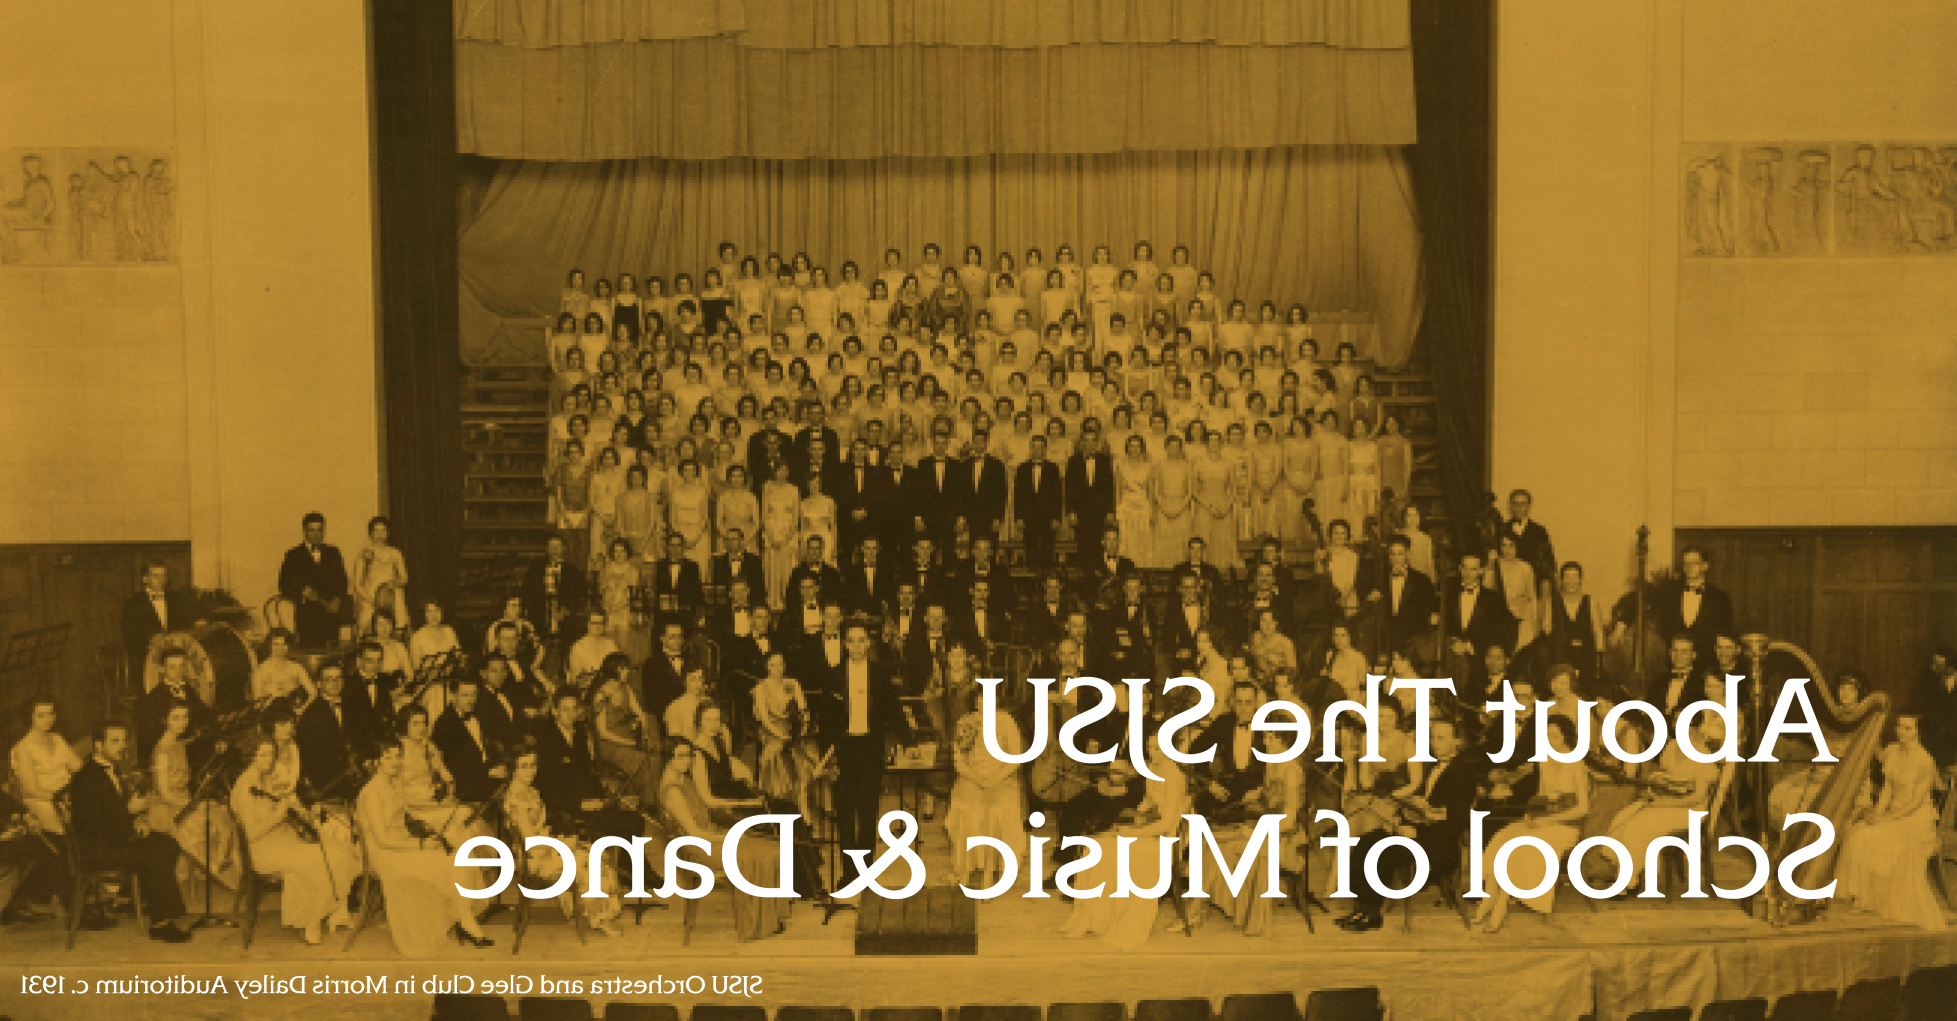 Historic image of School of Music musicians on stage.